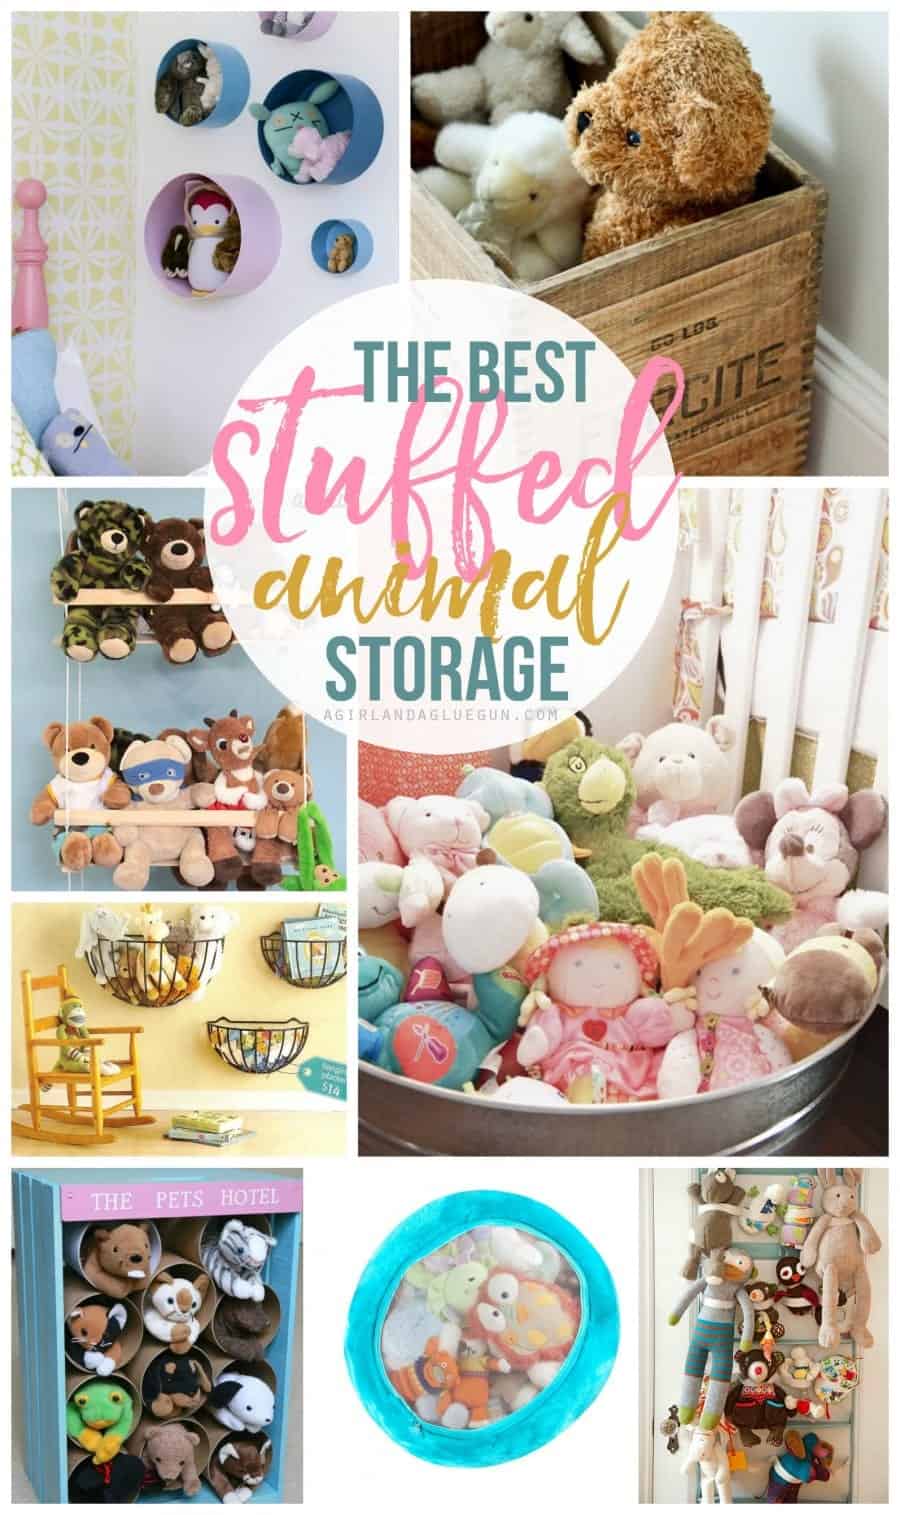 The very best stuffed animal storage and organization ideas for any kids bedroom